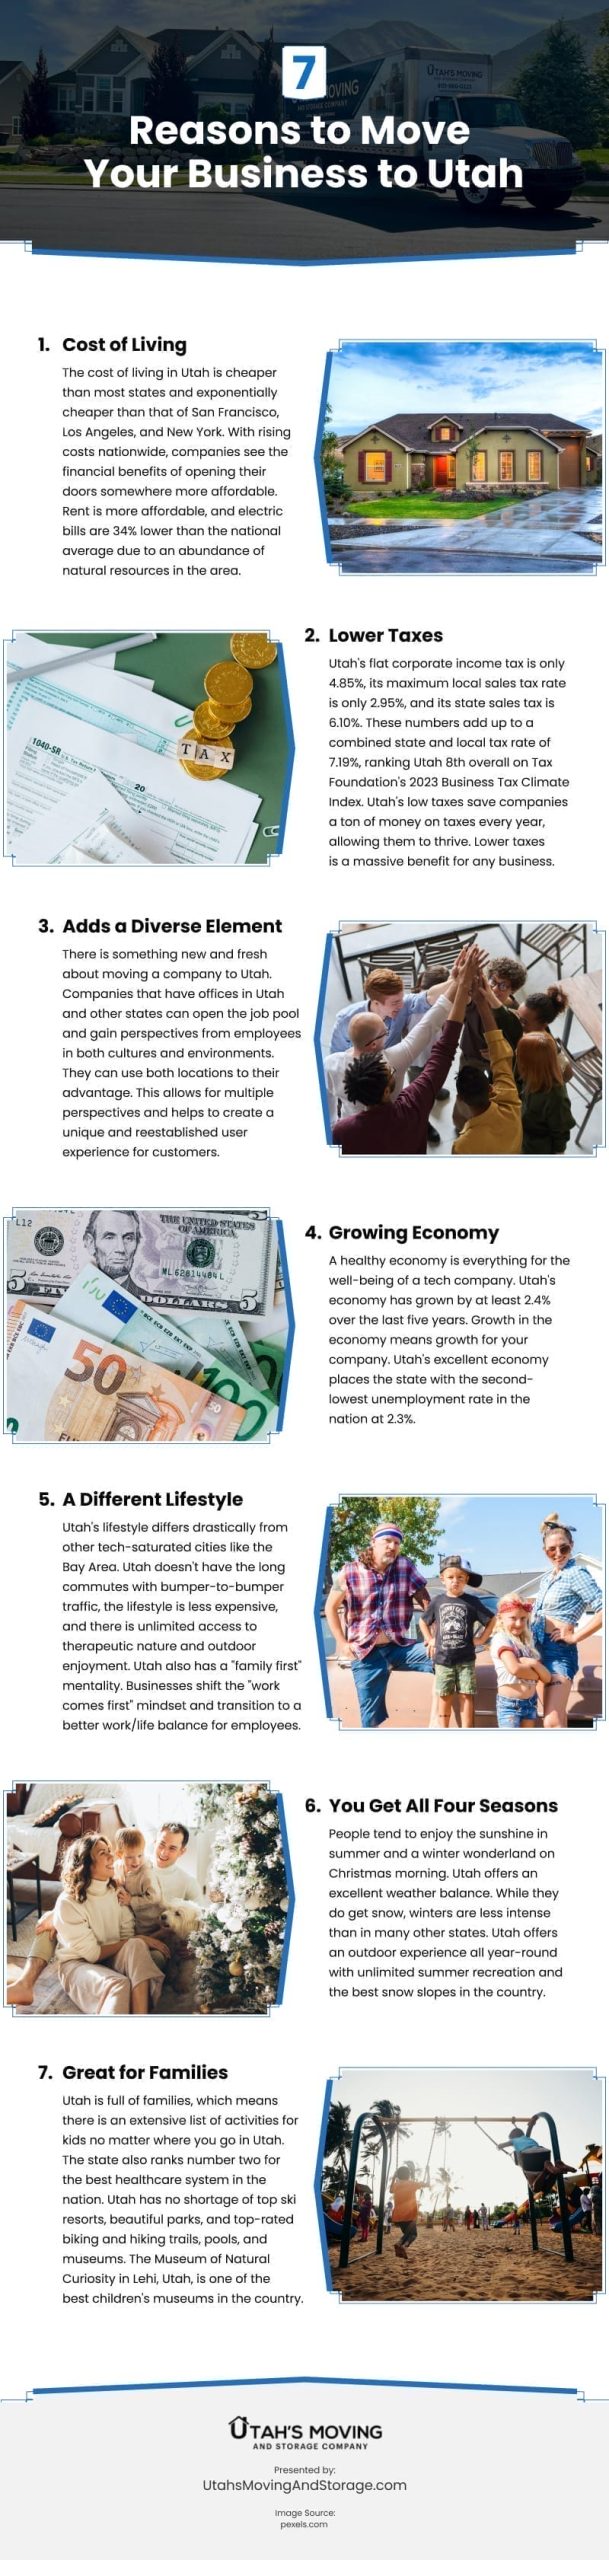 7 Reasons to Move Your Business to Utah Infographic